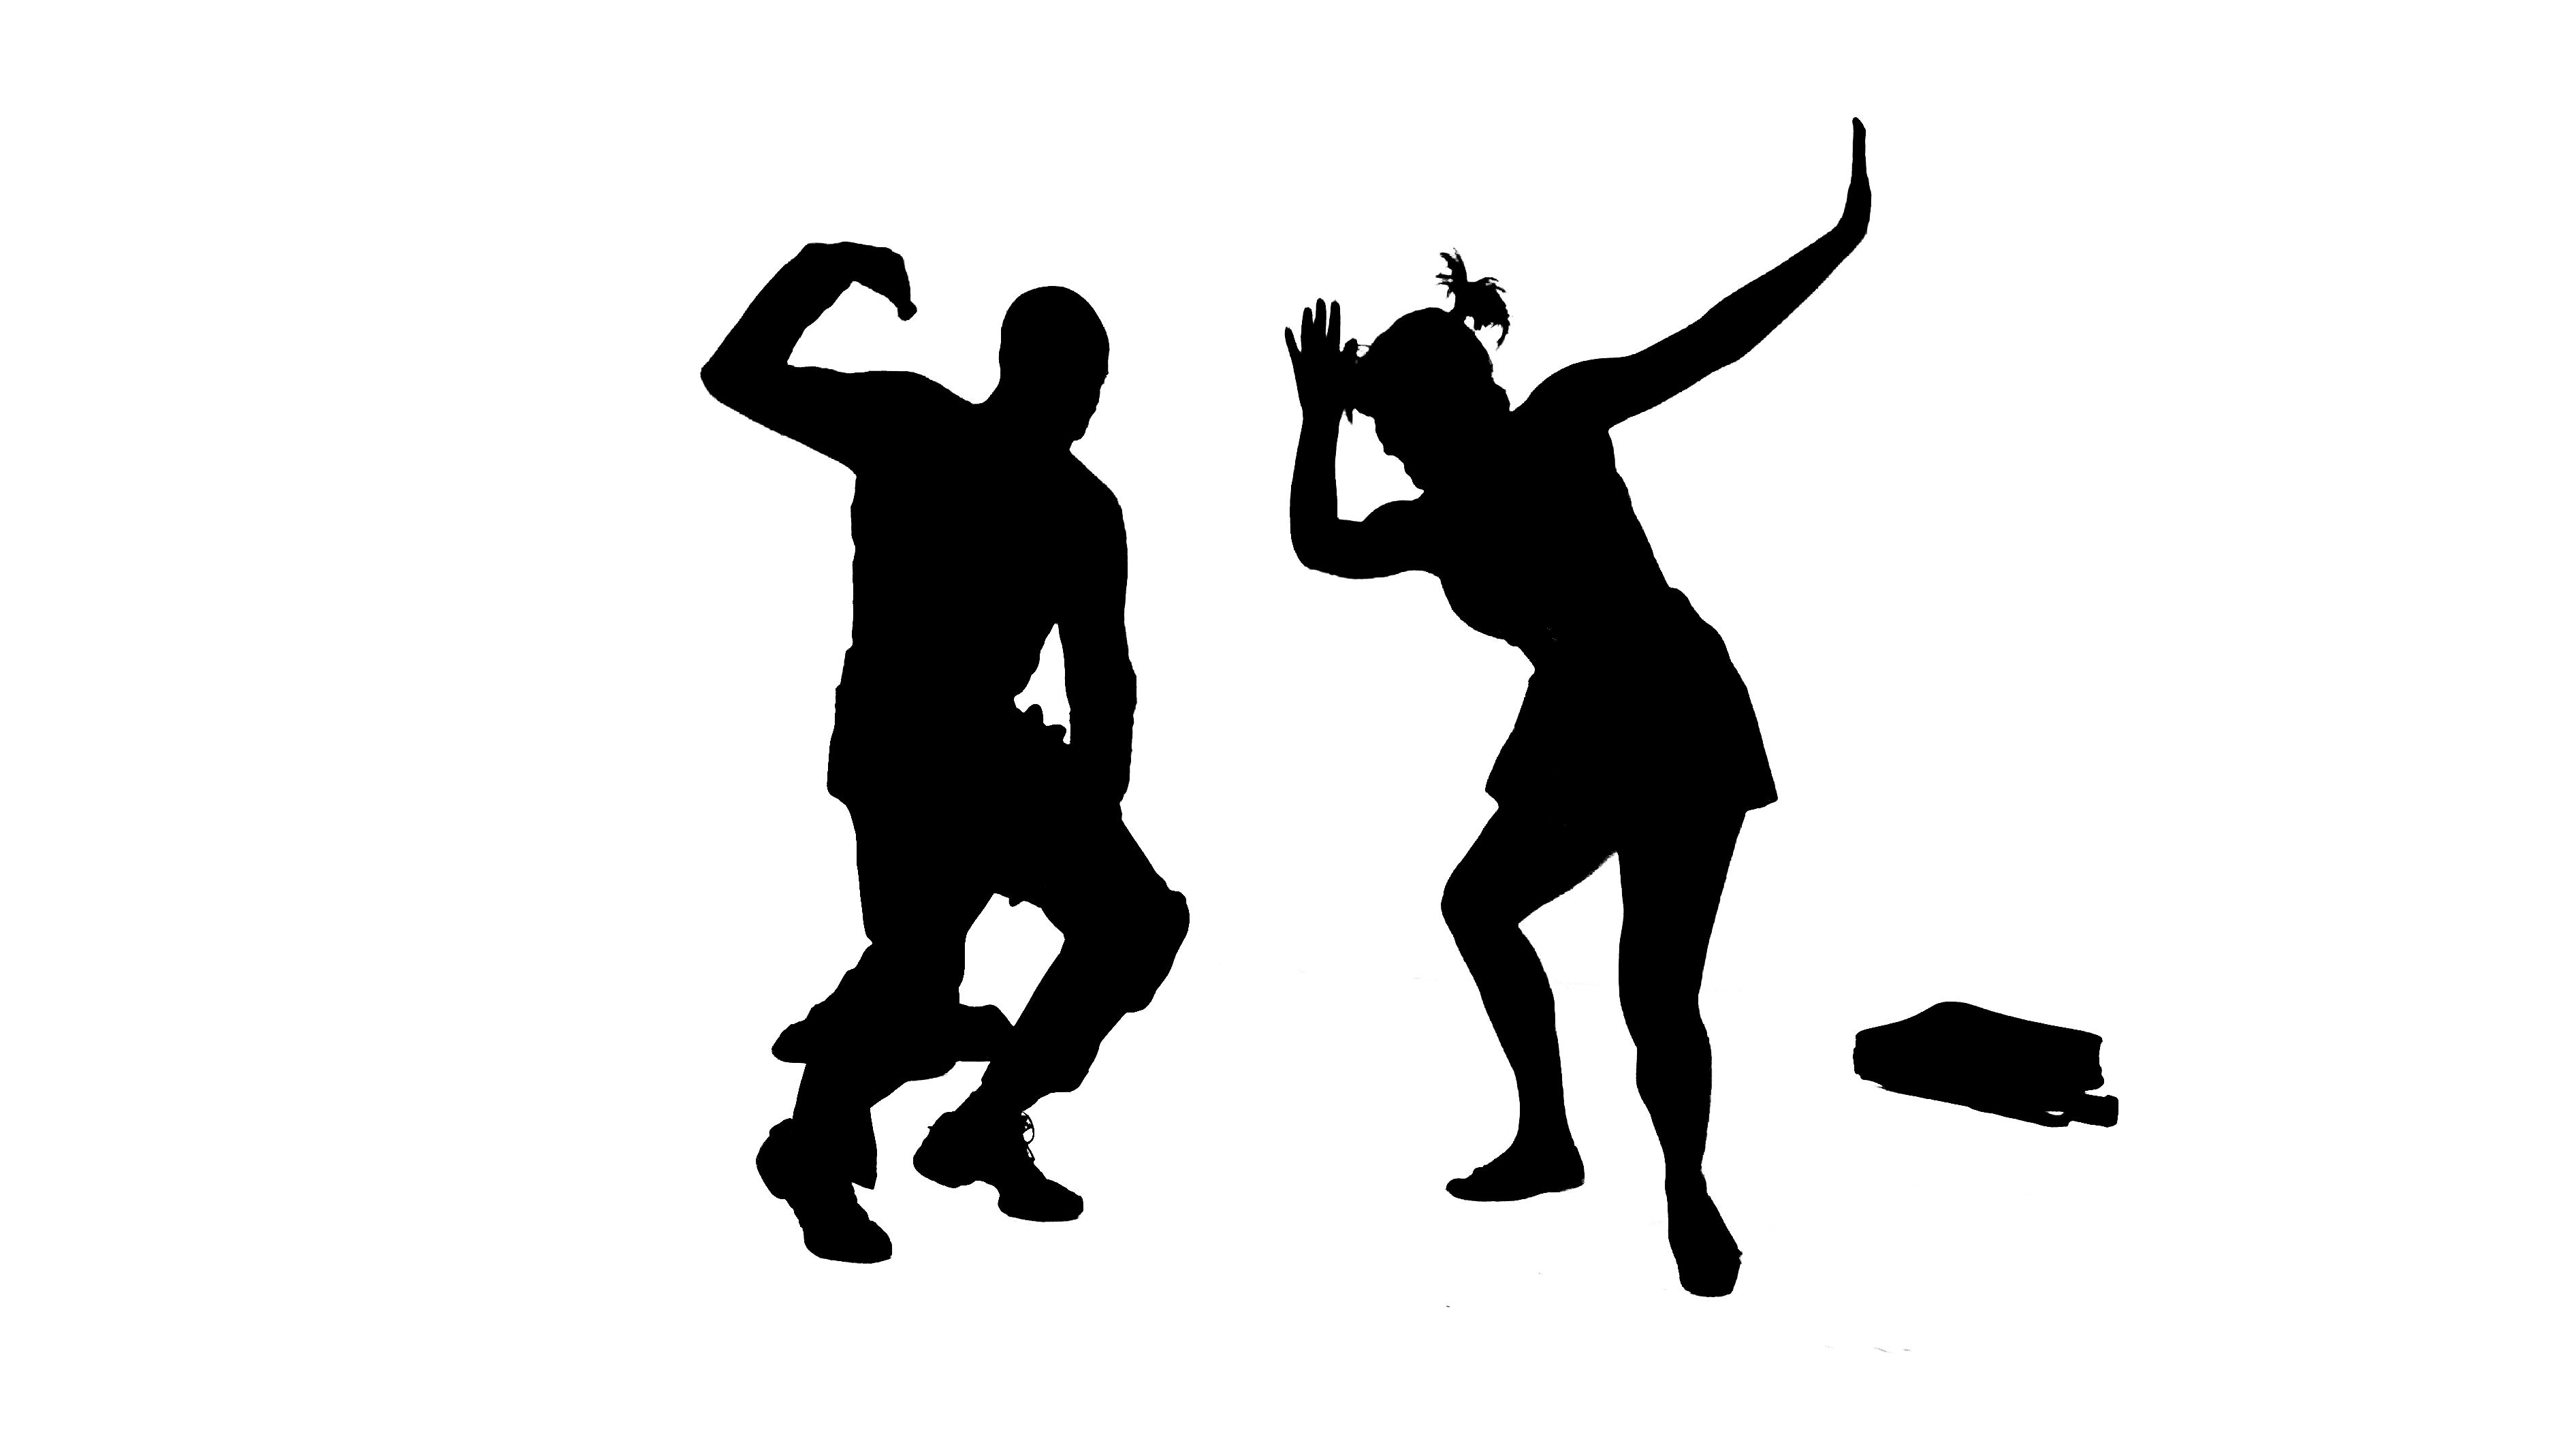 Dancing Couple Silhouette - ClipArt Best